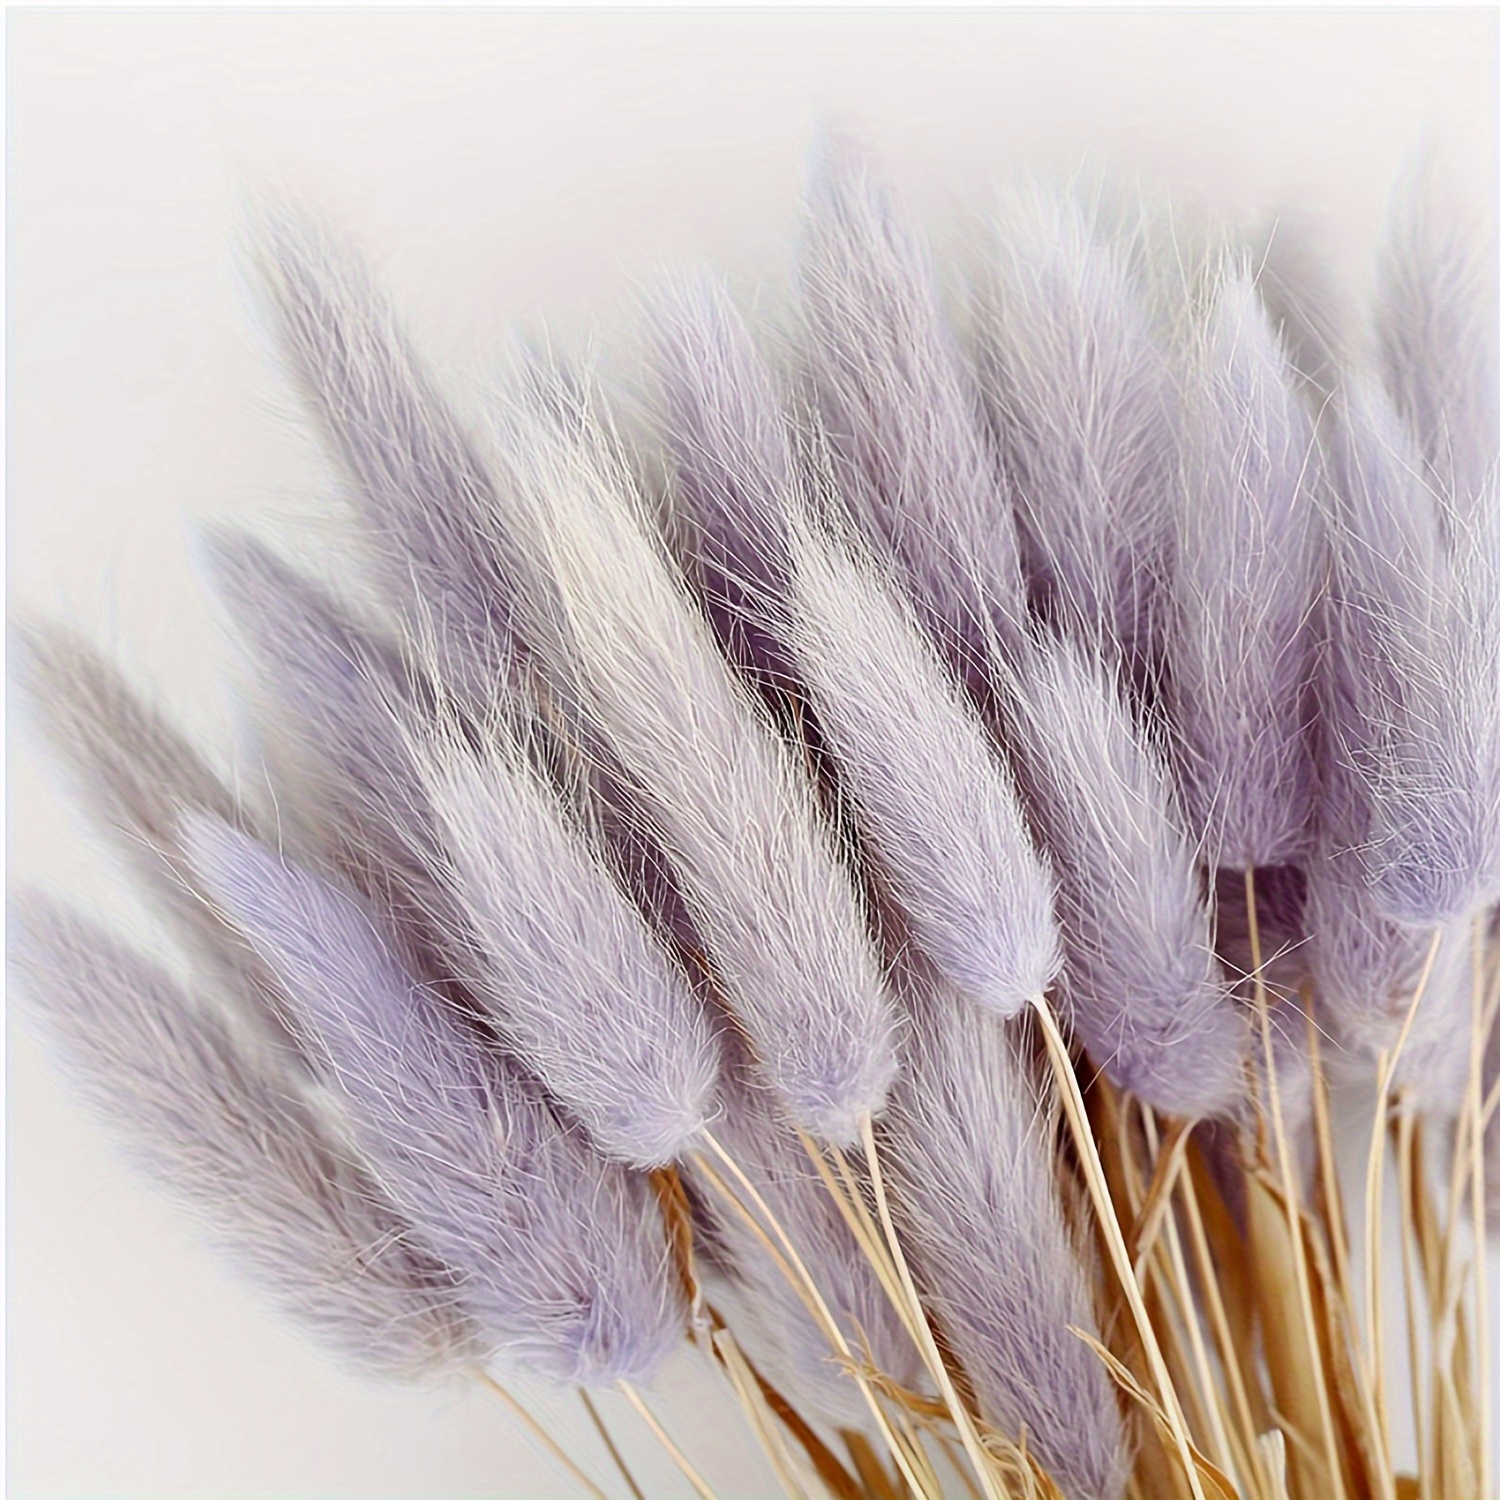 

17in Natural Bunny Tails Dried Flowers, 100 Pcs Dried Lagurus Ovatus, Dried Black Pampas Grass Decor For Farmhouse Flower Arrangements Wedding Home Craft Boho Party Halloween Decorations